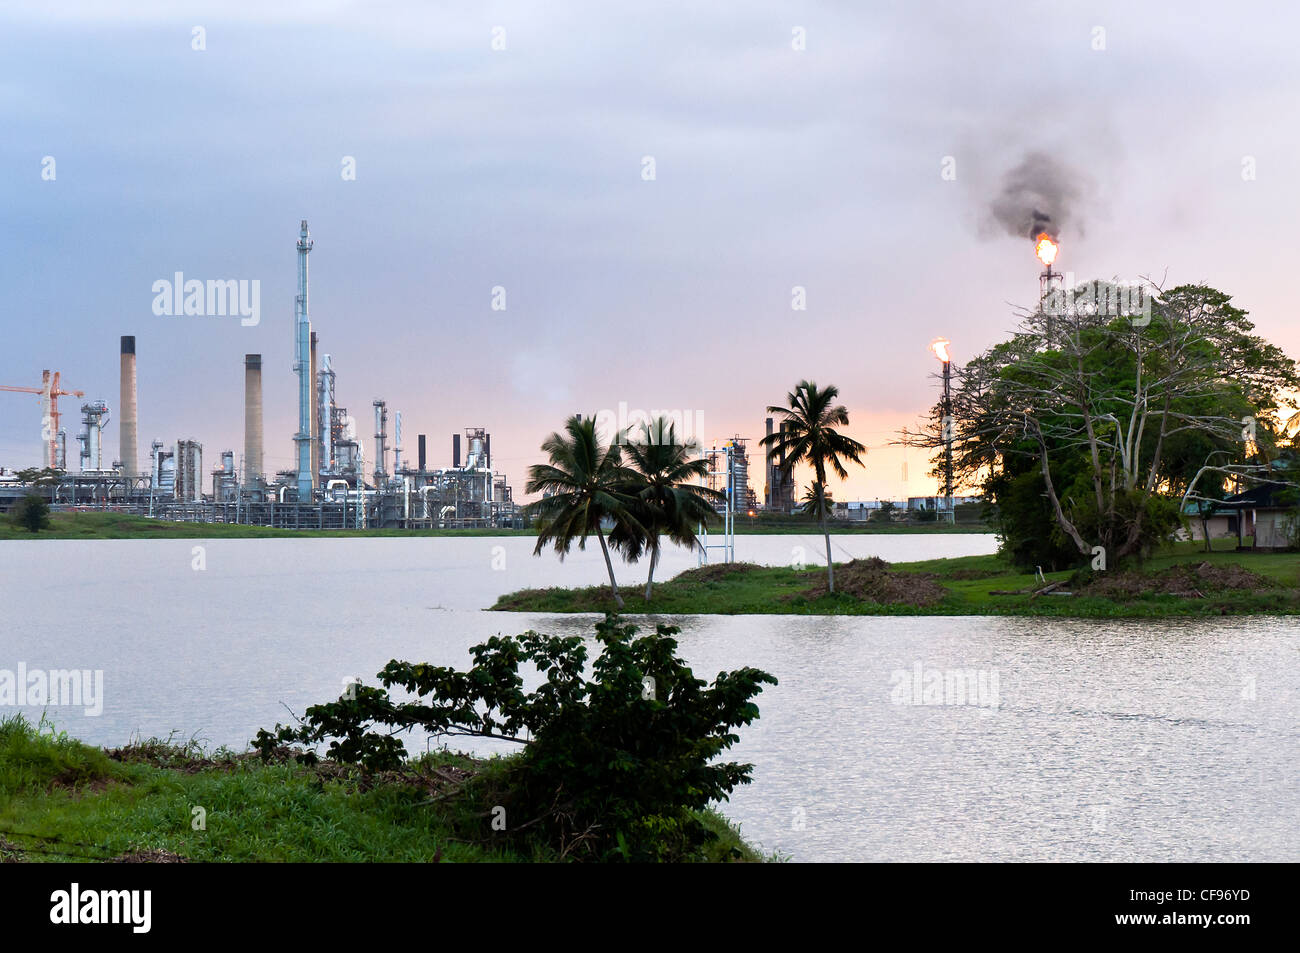 A methanol plant in San Fernando. Methanol is a common industrial chemical blended liquid transportation fuel. Stock Photo